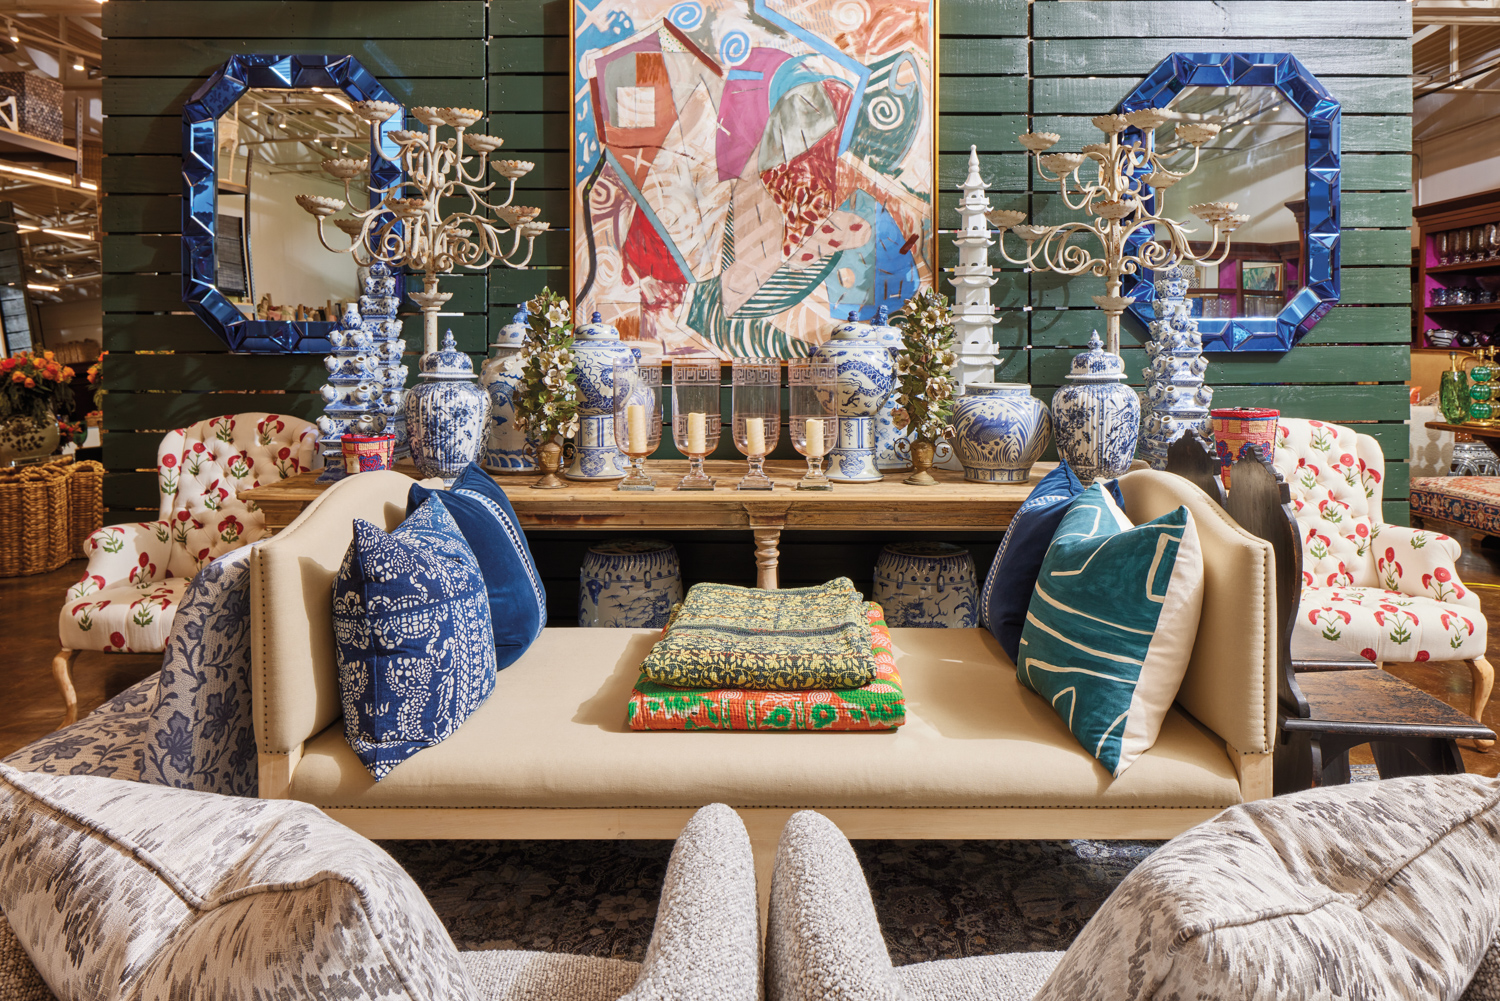 Curated showroom vignette of seating, pillows, chinoiserie vessels and mirrors